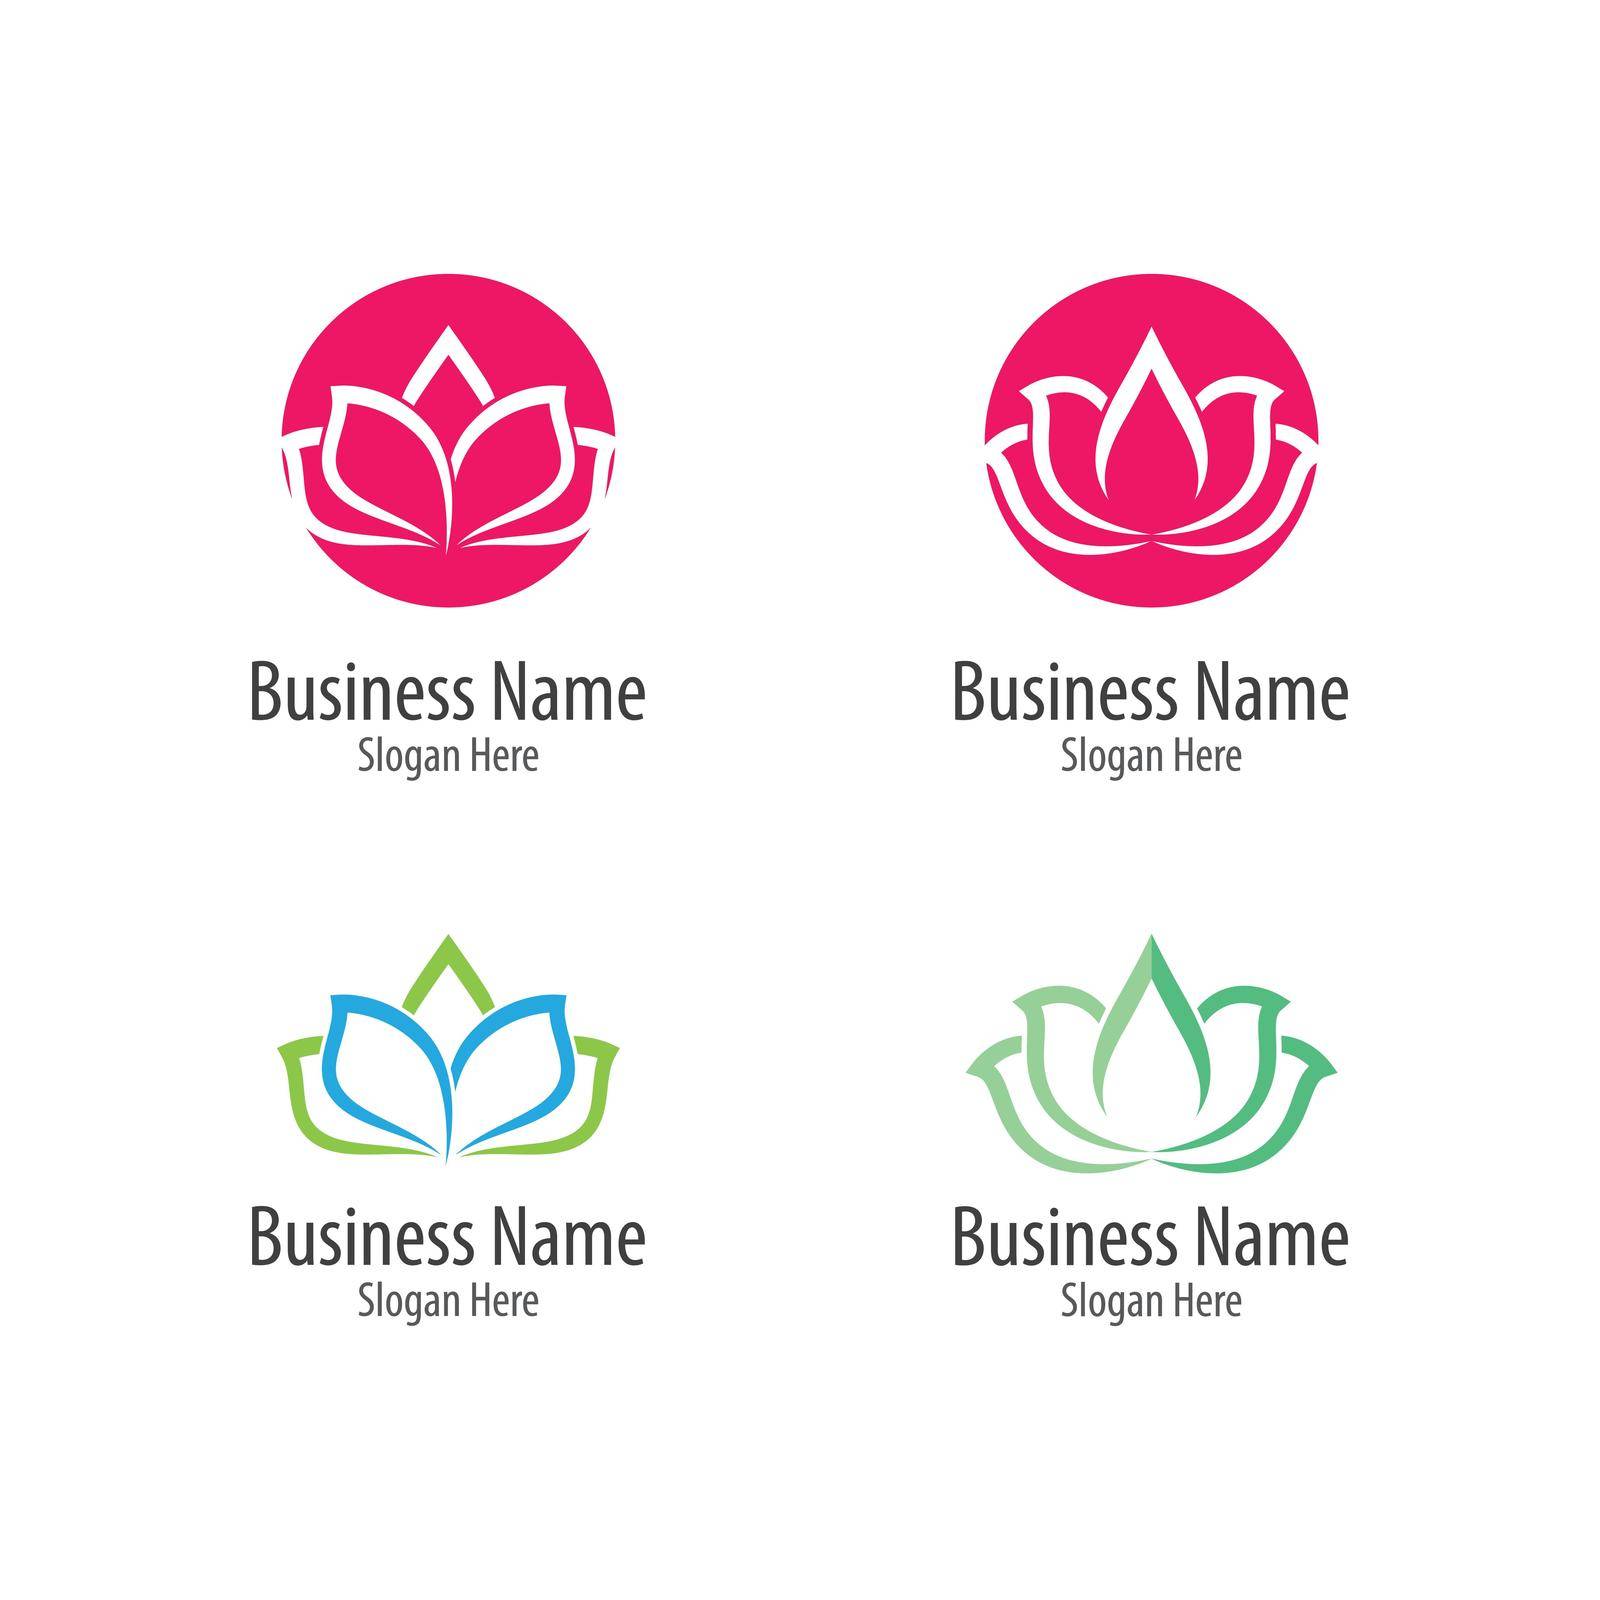 Beauty flowers logo template vector by Attades19